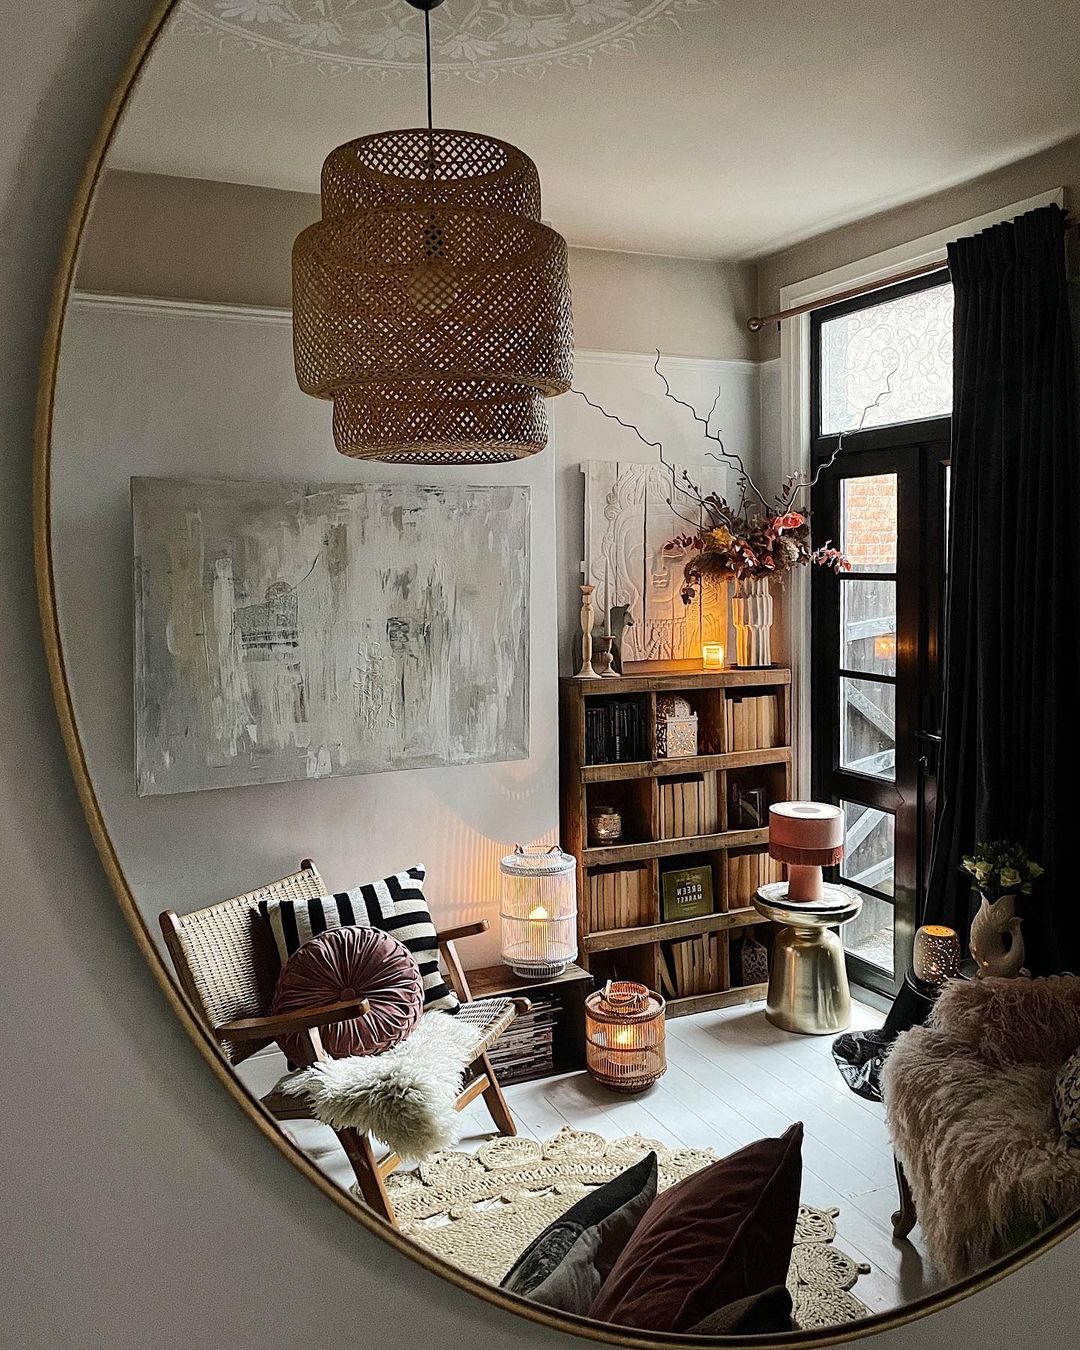 the reflection of a bohemian living room as seen through a round wall mirror.